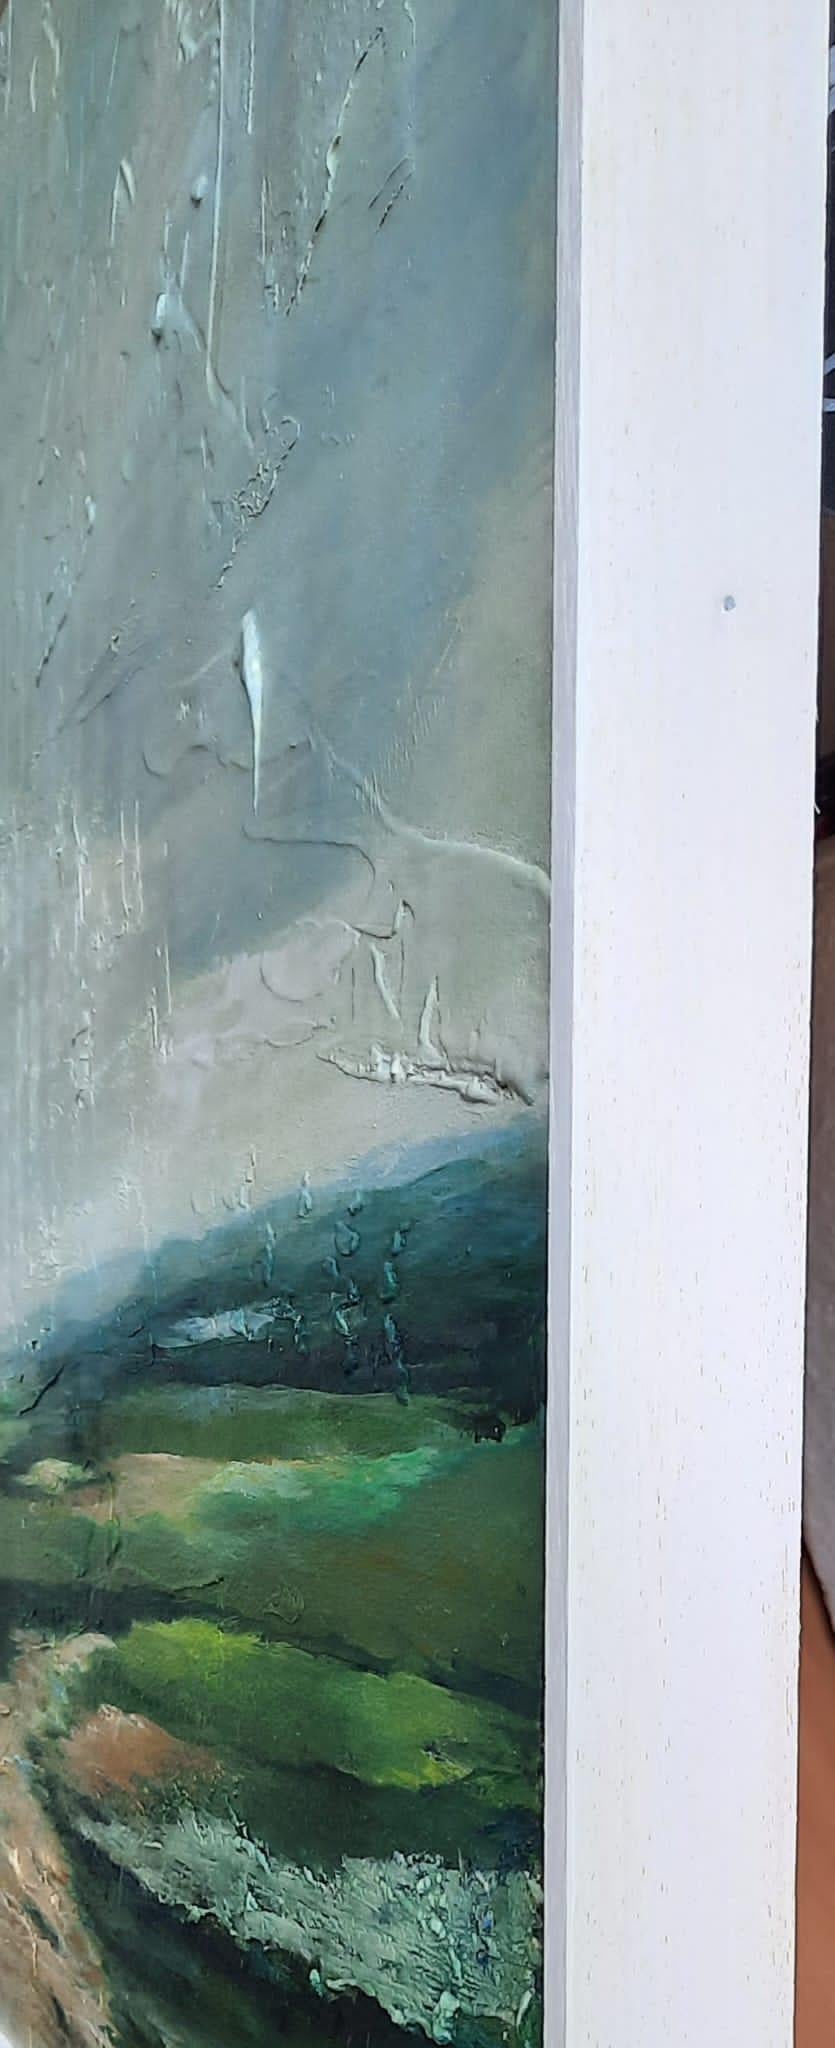 On my way. 
Modern figurative landscape painting by Spanish artist Ángel Luis Úbeda.
 Acrylic and mixed media on panel.  60x122x3.5 cm. / 23.62x48.03x1.38 Inches

The author stratifies the landscape with green reliefs, opened by the incision of a